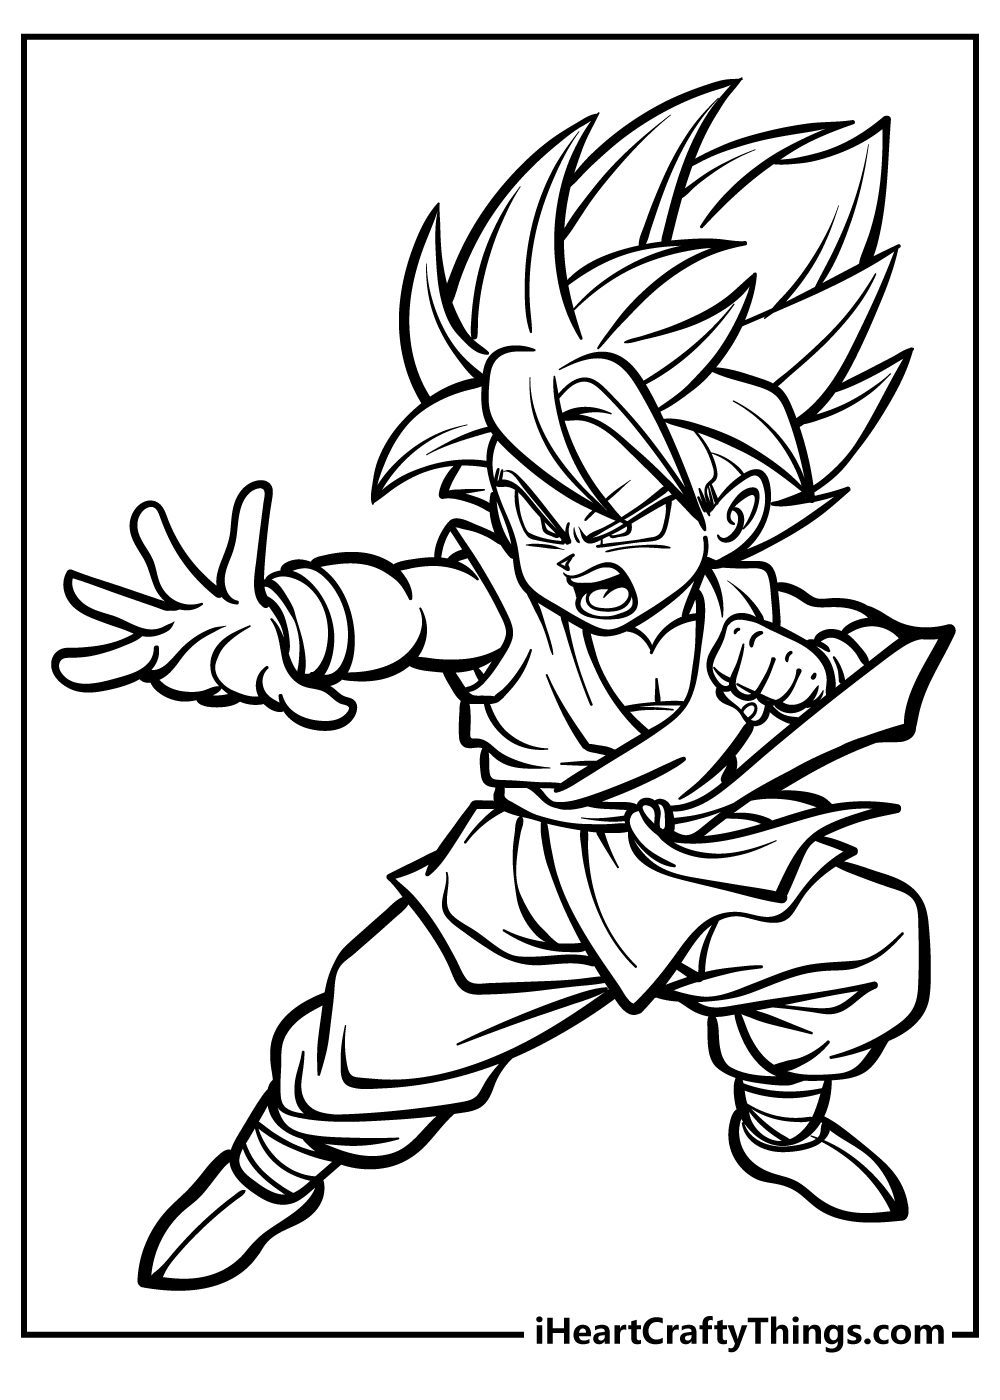 Goku coloring pages free printables